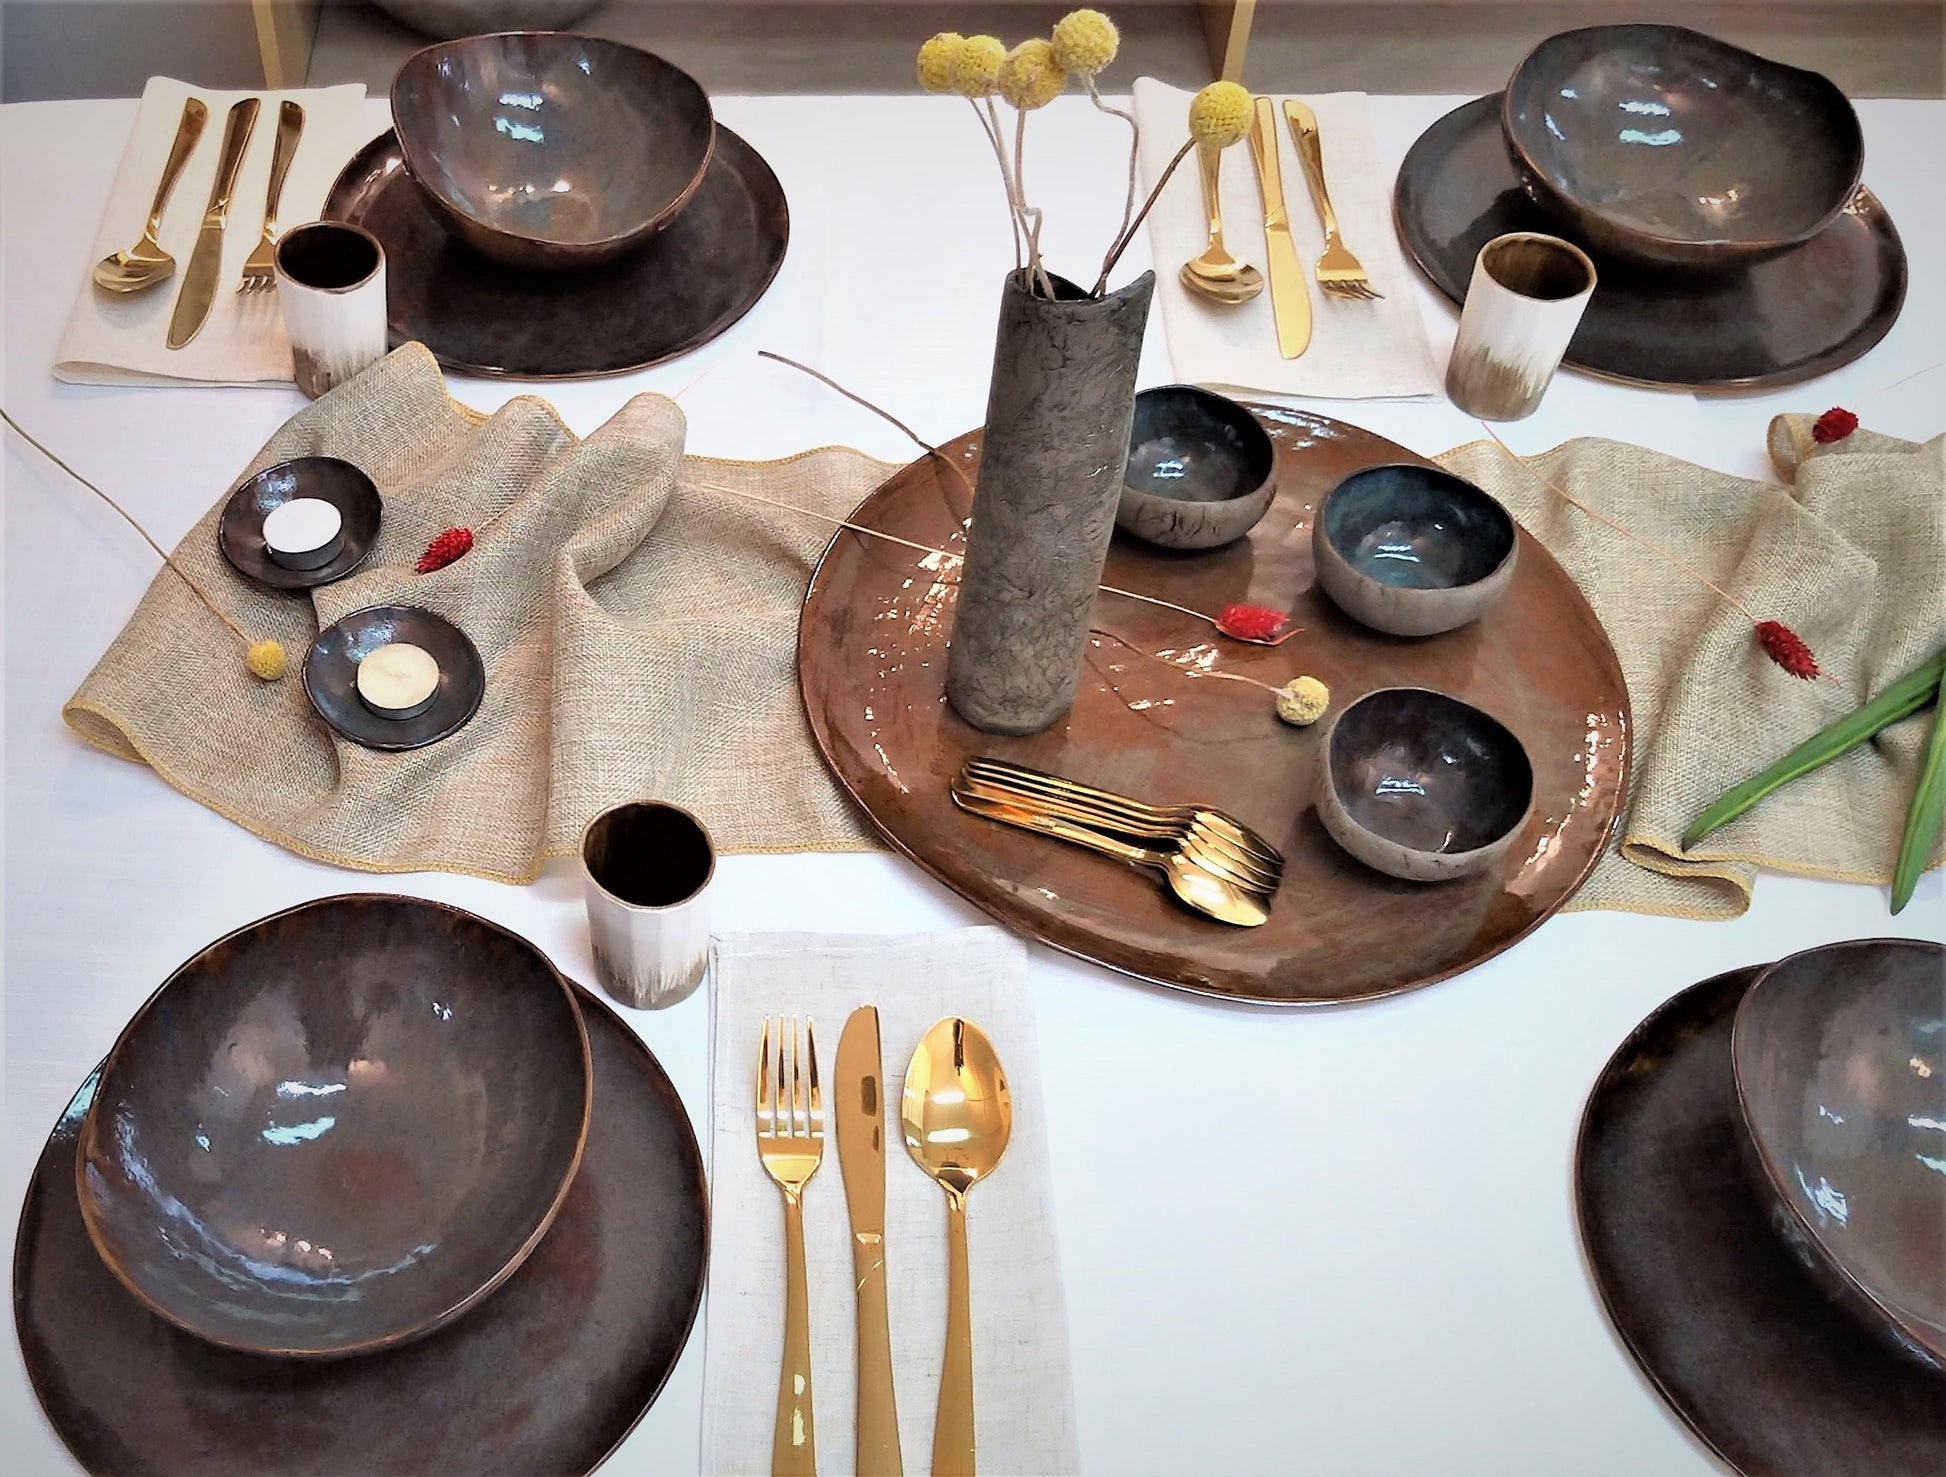 Modern Easter Dinnerware Set for 6-12 People - Brown Ceramic Dishes fo –  YOMYOM CERAMIC By yossi malca